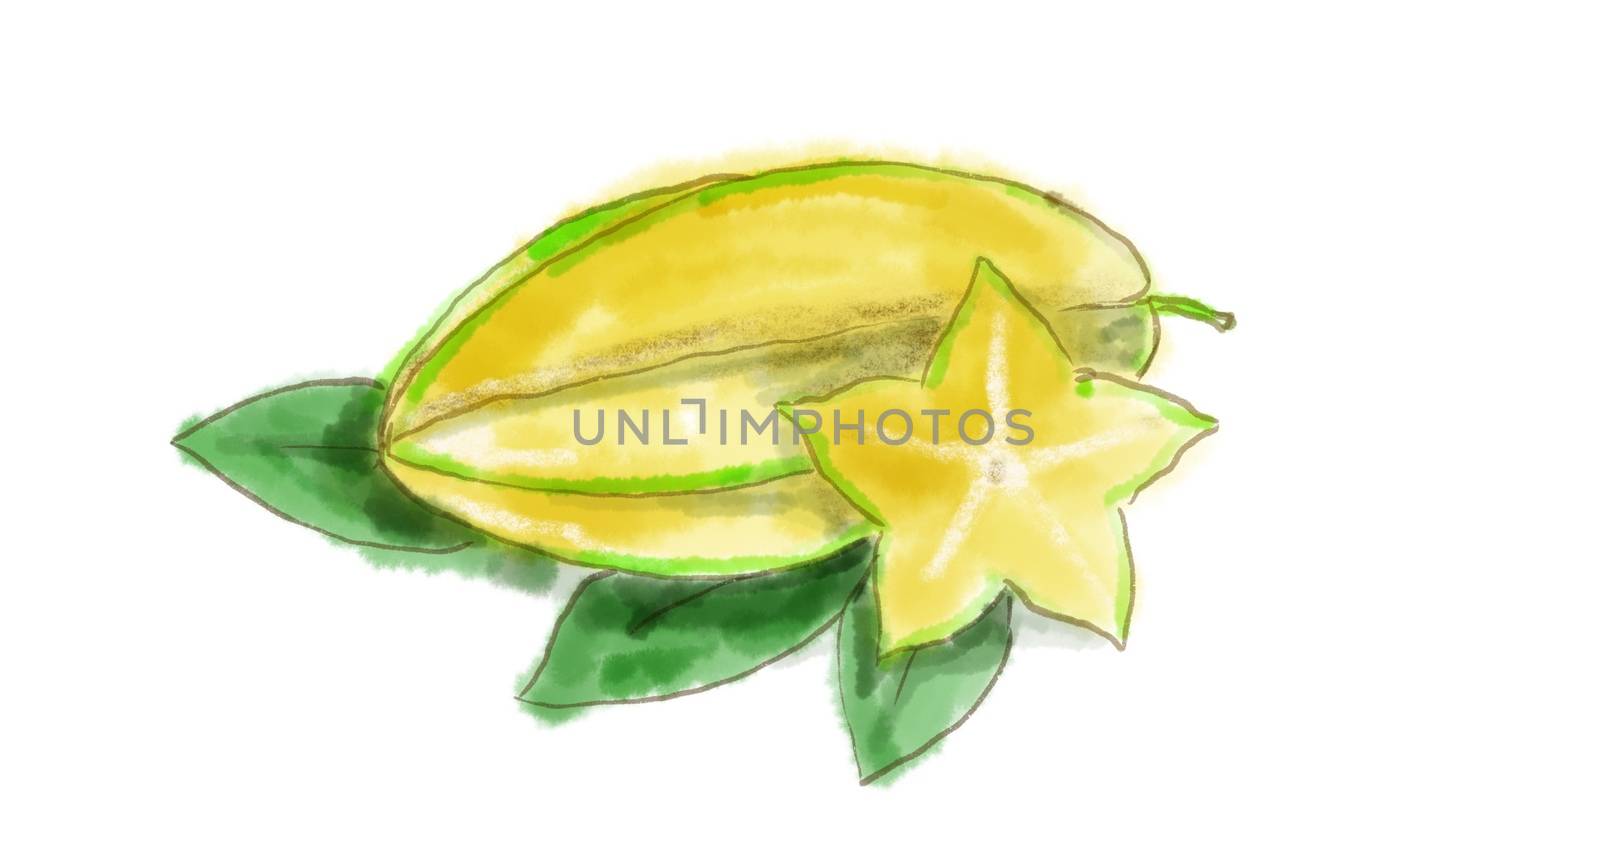 Watercolor drawing of a Carambola, or star fruit, the fruit of Averrhoa carambola on white.